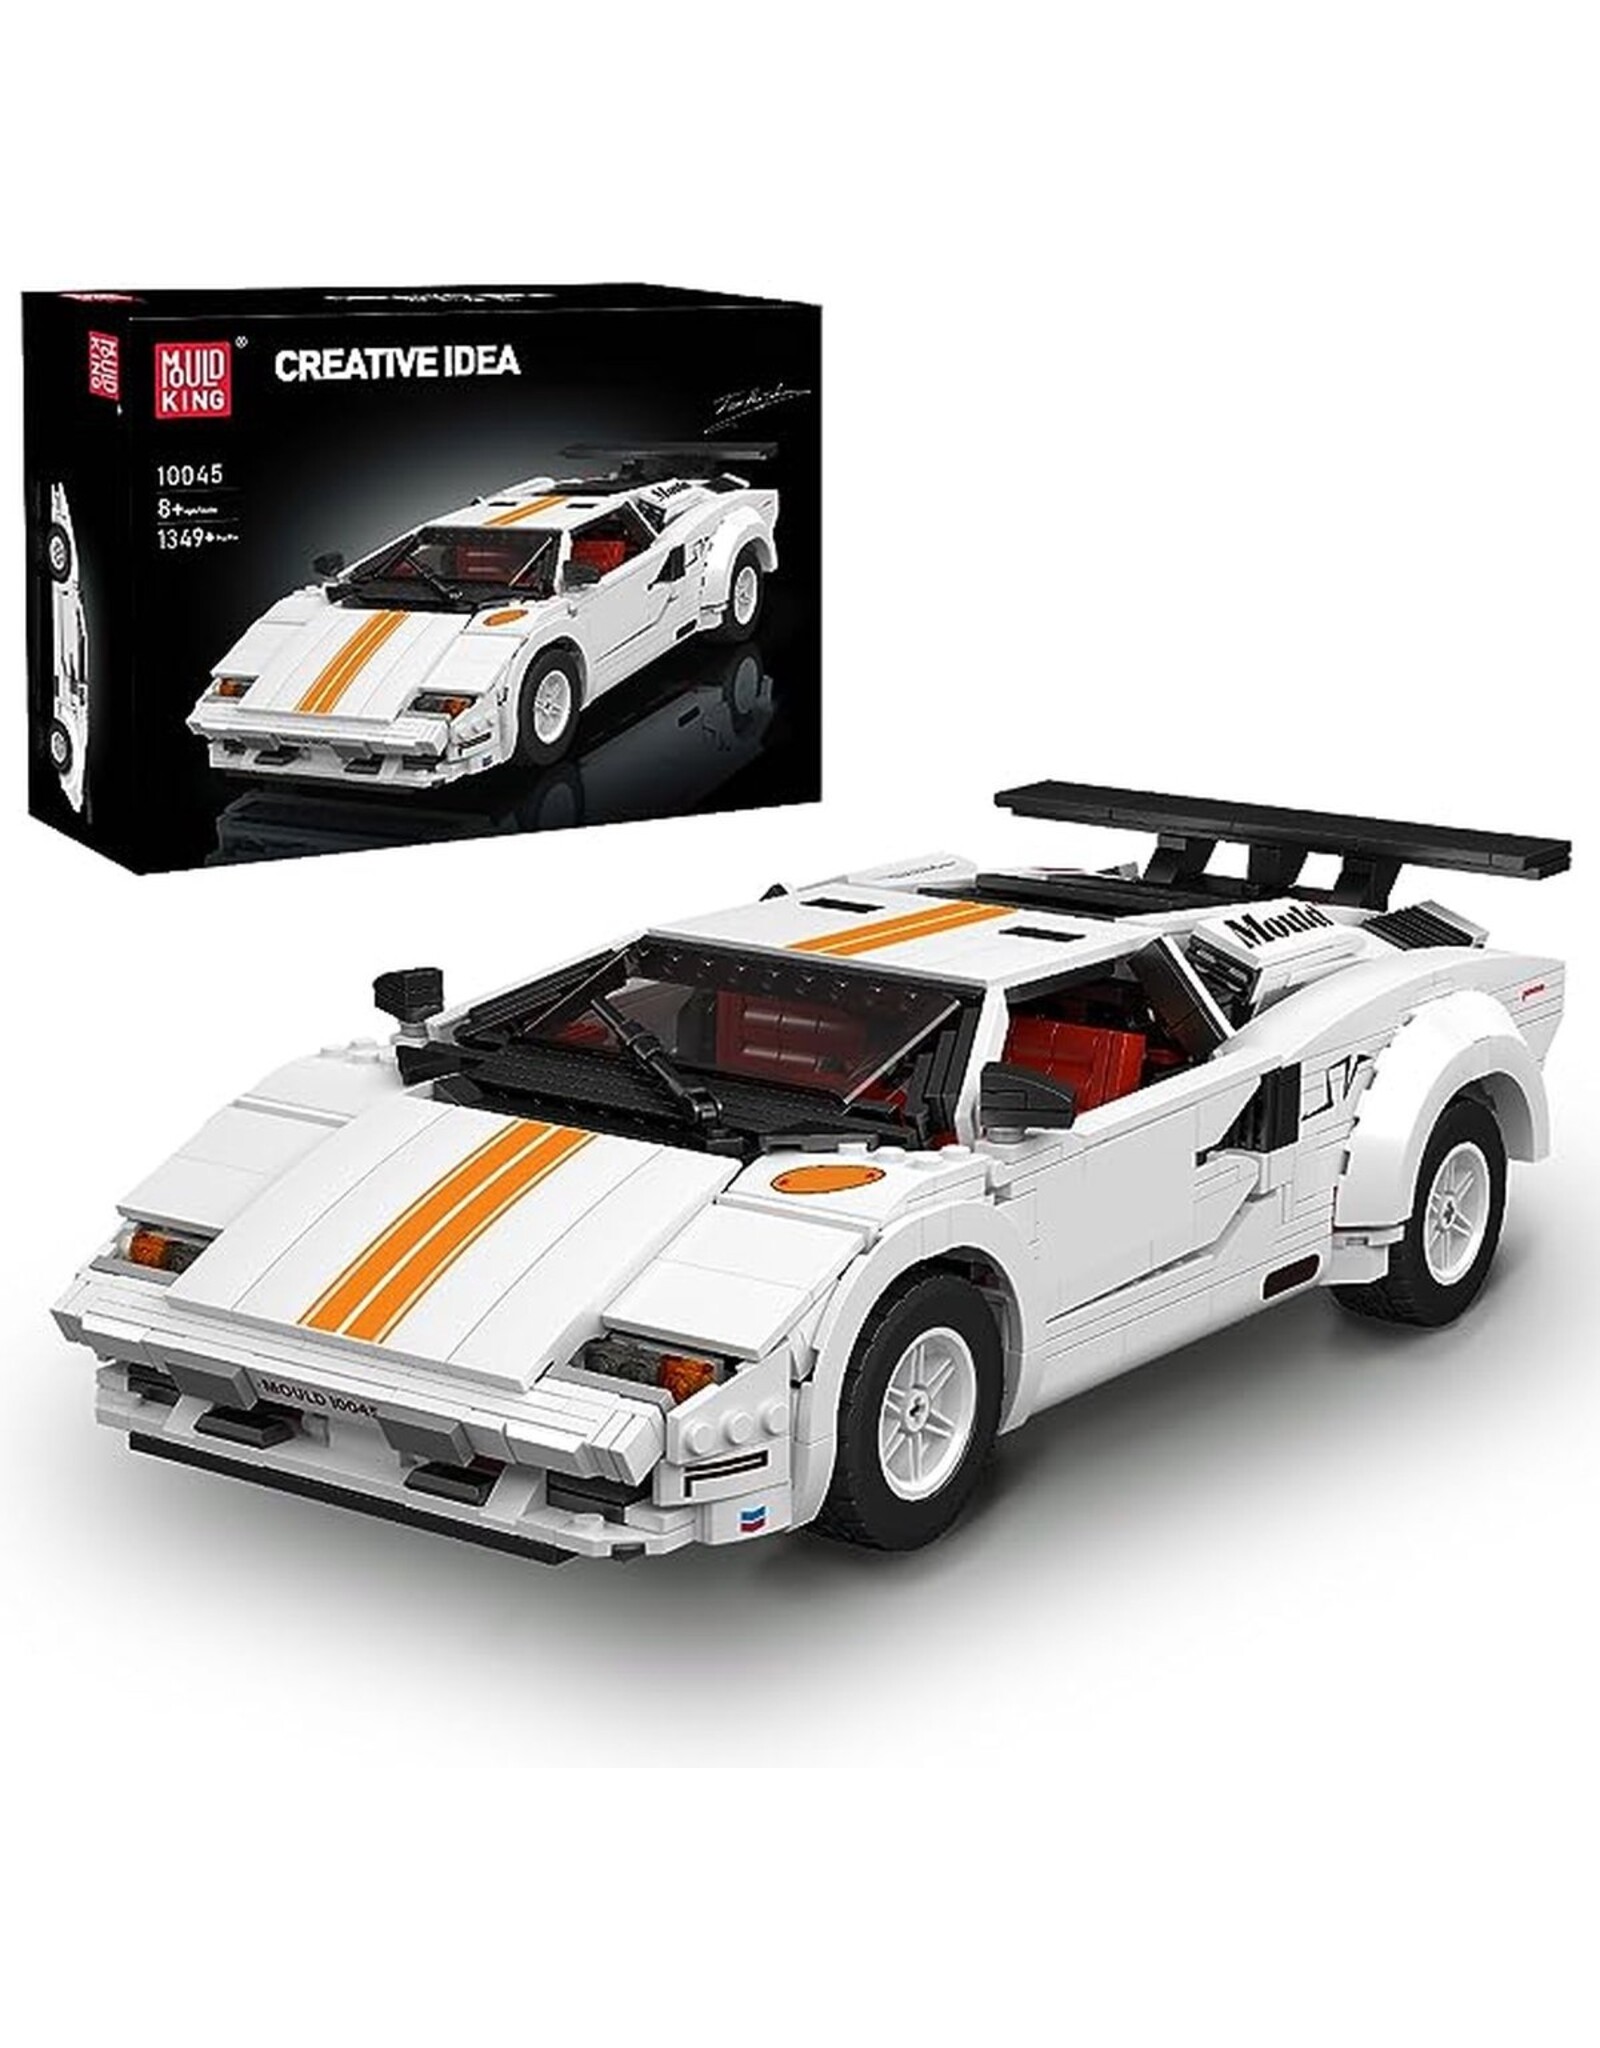 Mould King Mould King 10045 Lambo Countach